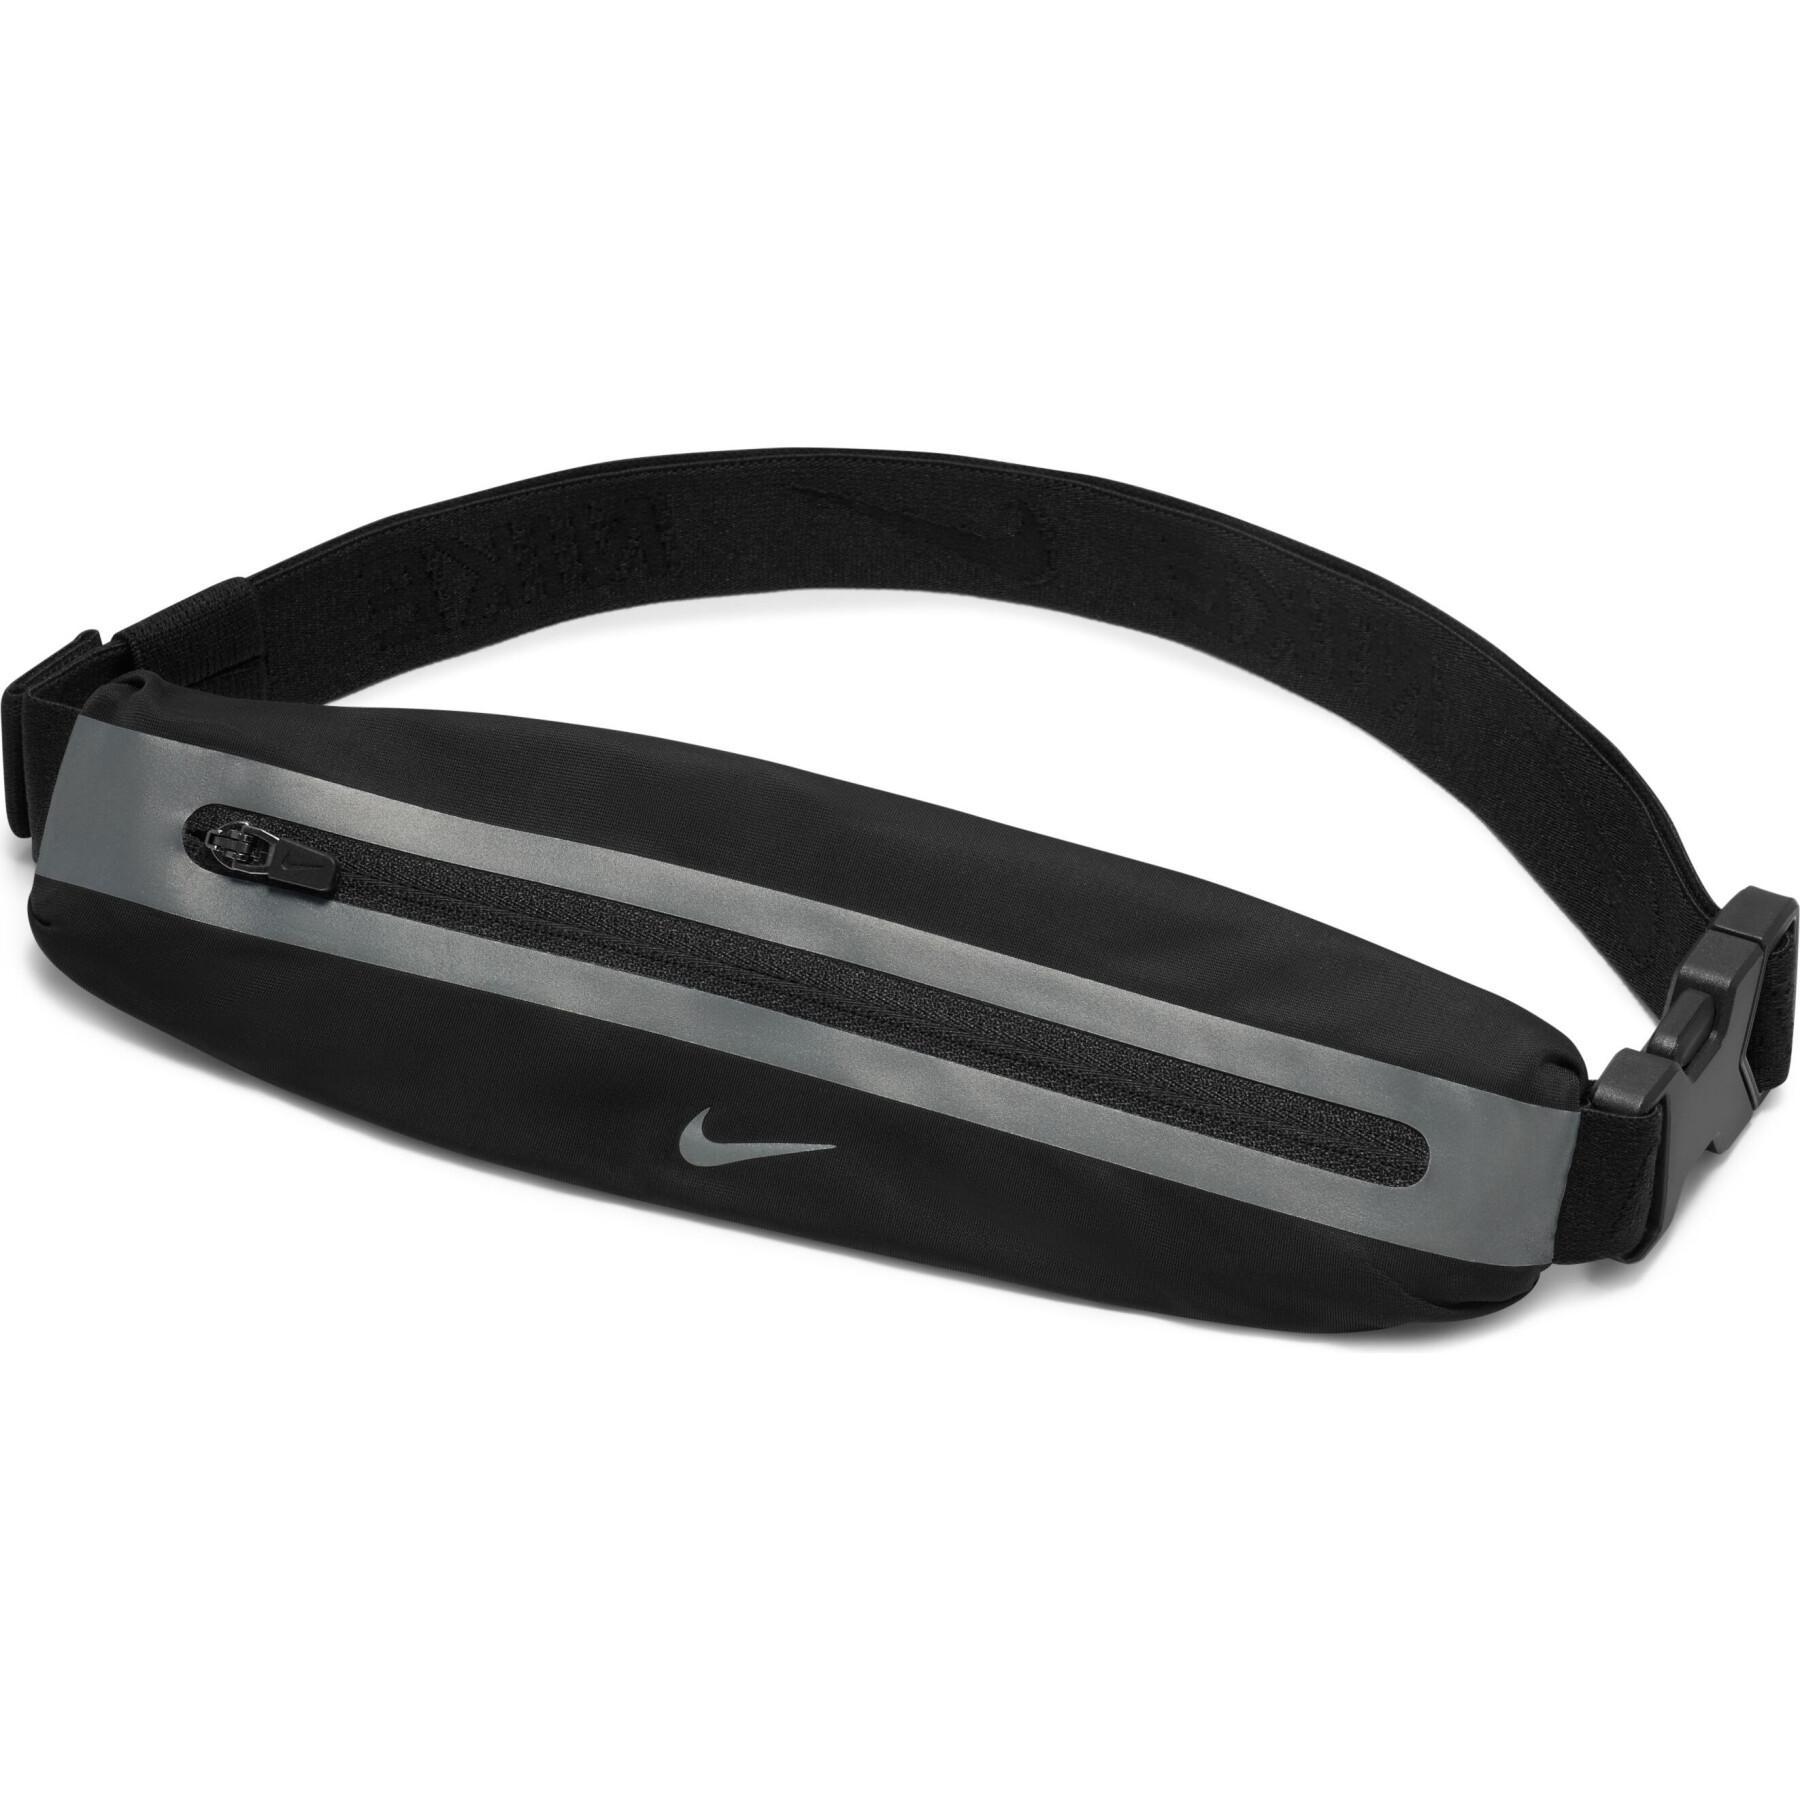 Sacoche banane Nike Pack 3.0 - Bagagerie - Equipements - Running